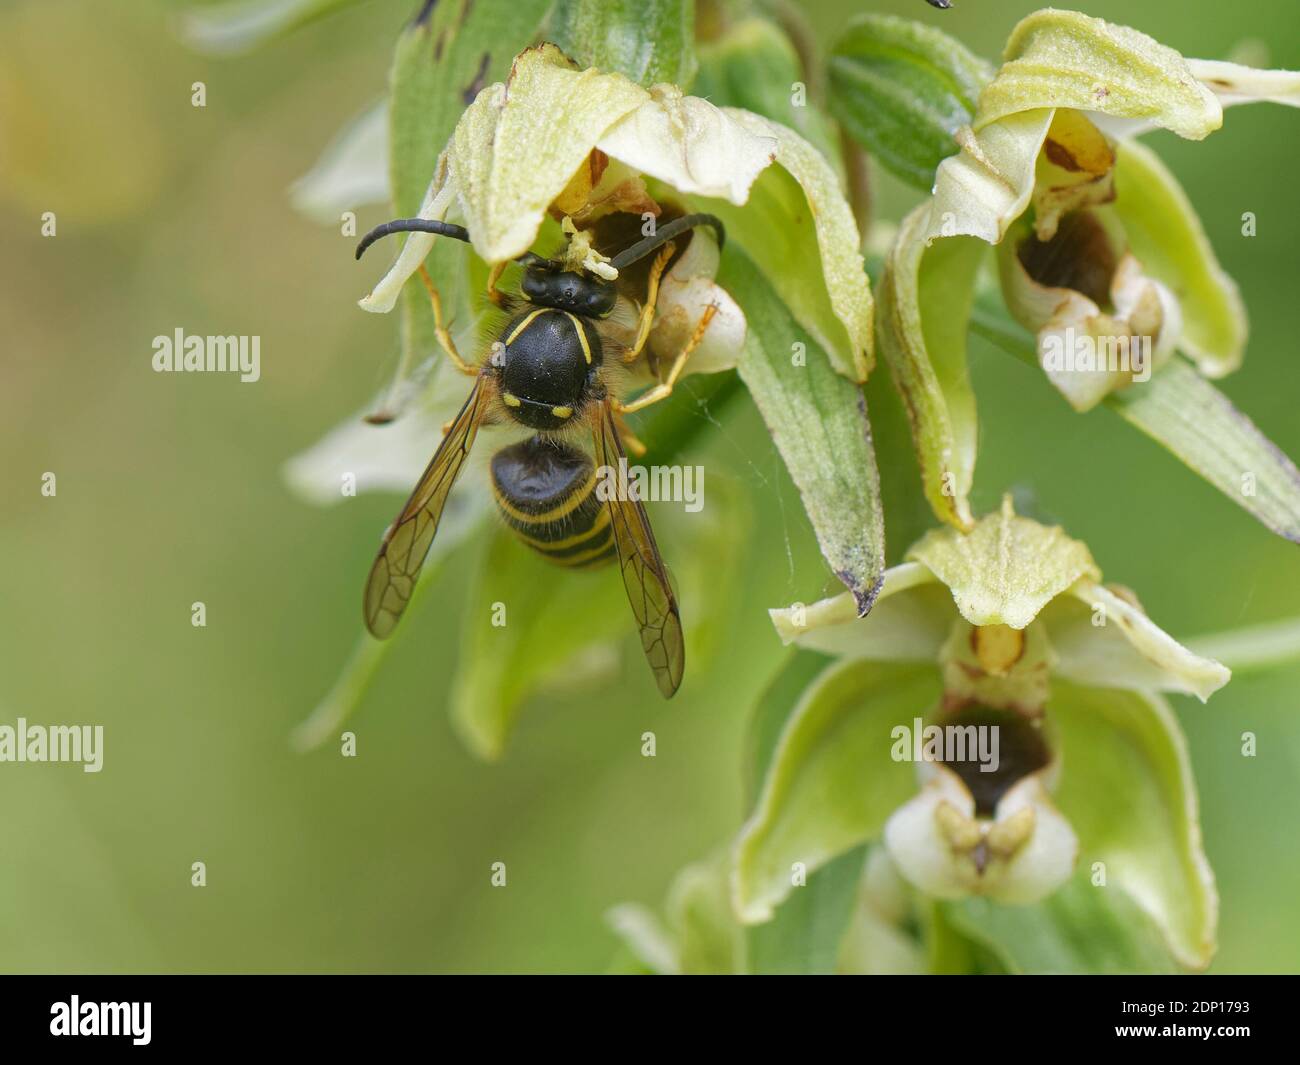 Saxon wasp (Dolichovespula saxonica) with a pollinia on its head nectaring from a Broad-leaved helleborine (Epipactis helleborine), Bath, UK. Stock Photo